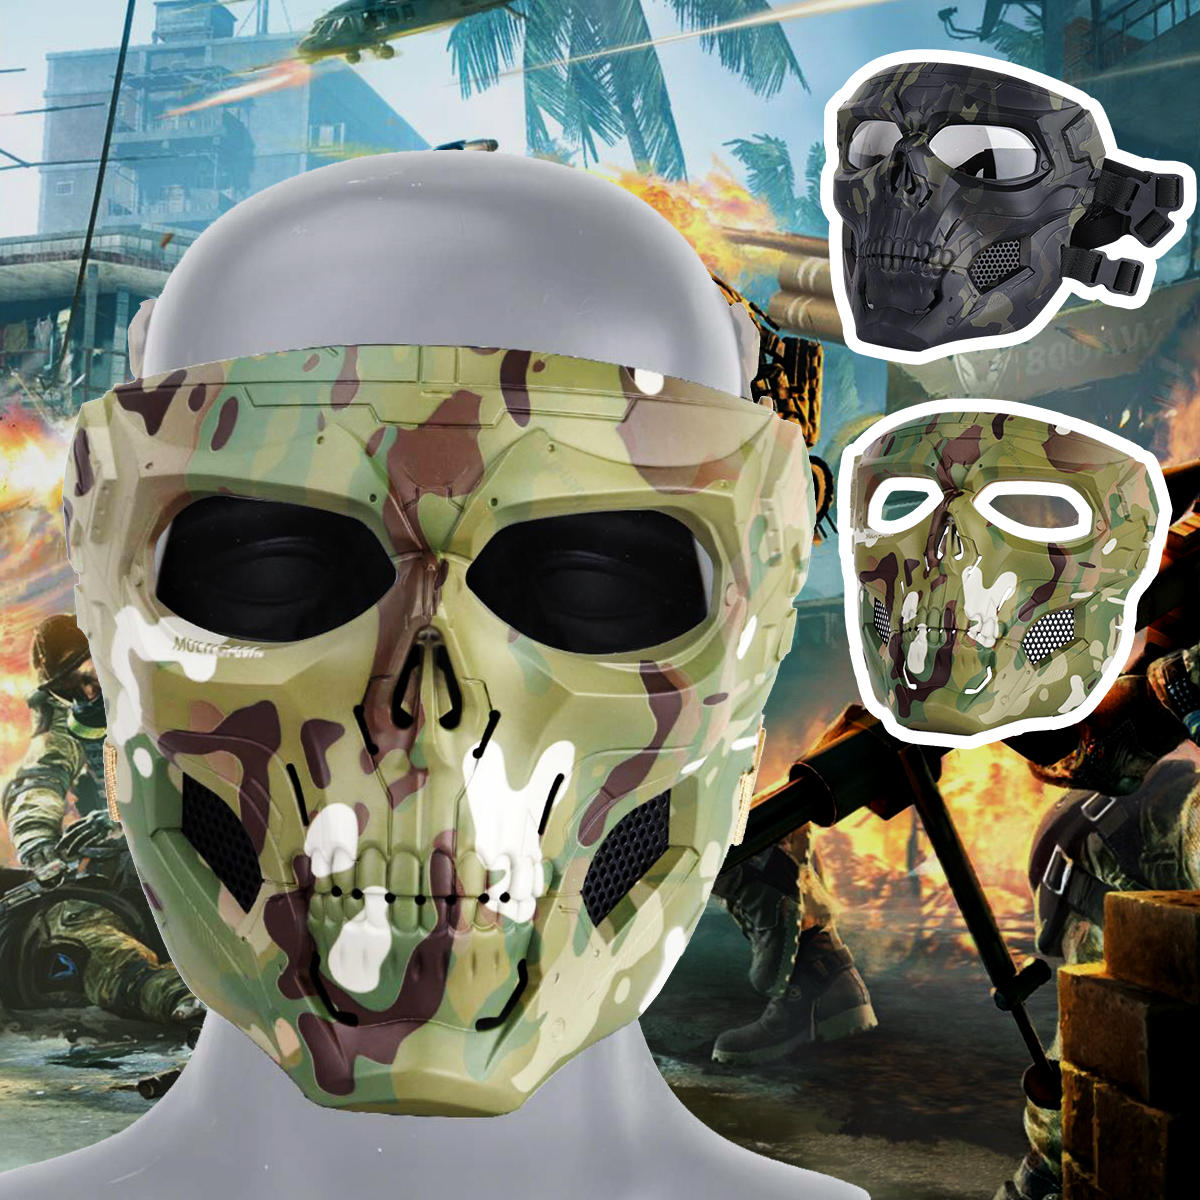 WoSporT Skull Airsoft Paintball Mask Full Face Tactical Halloween Party Mask